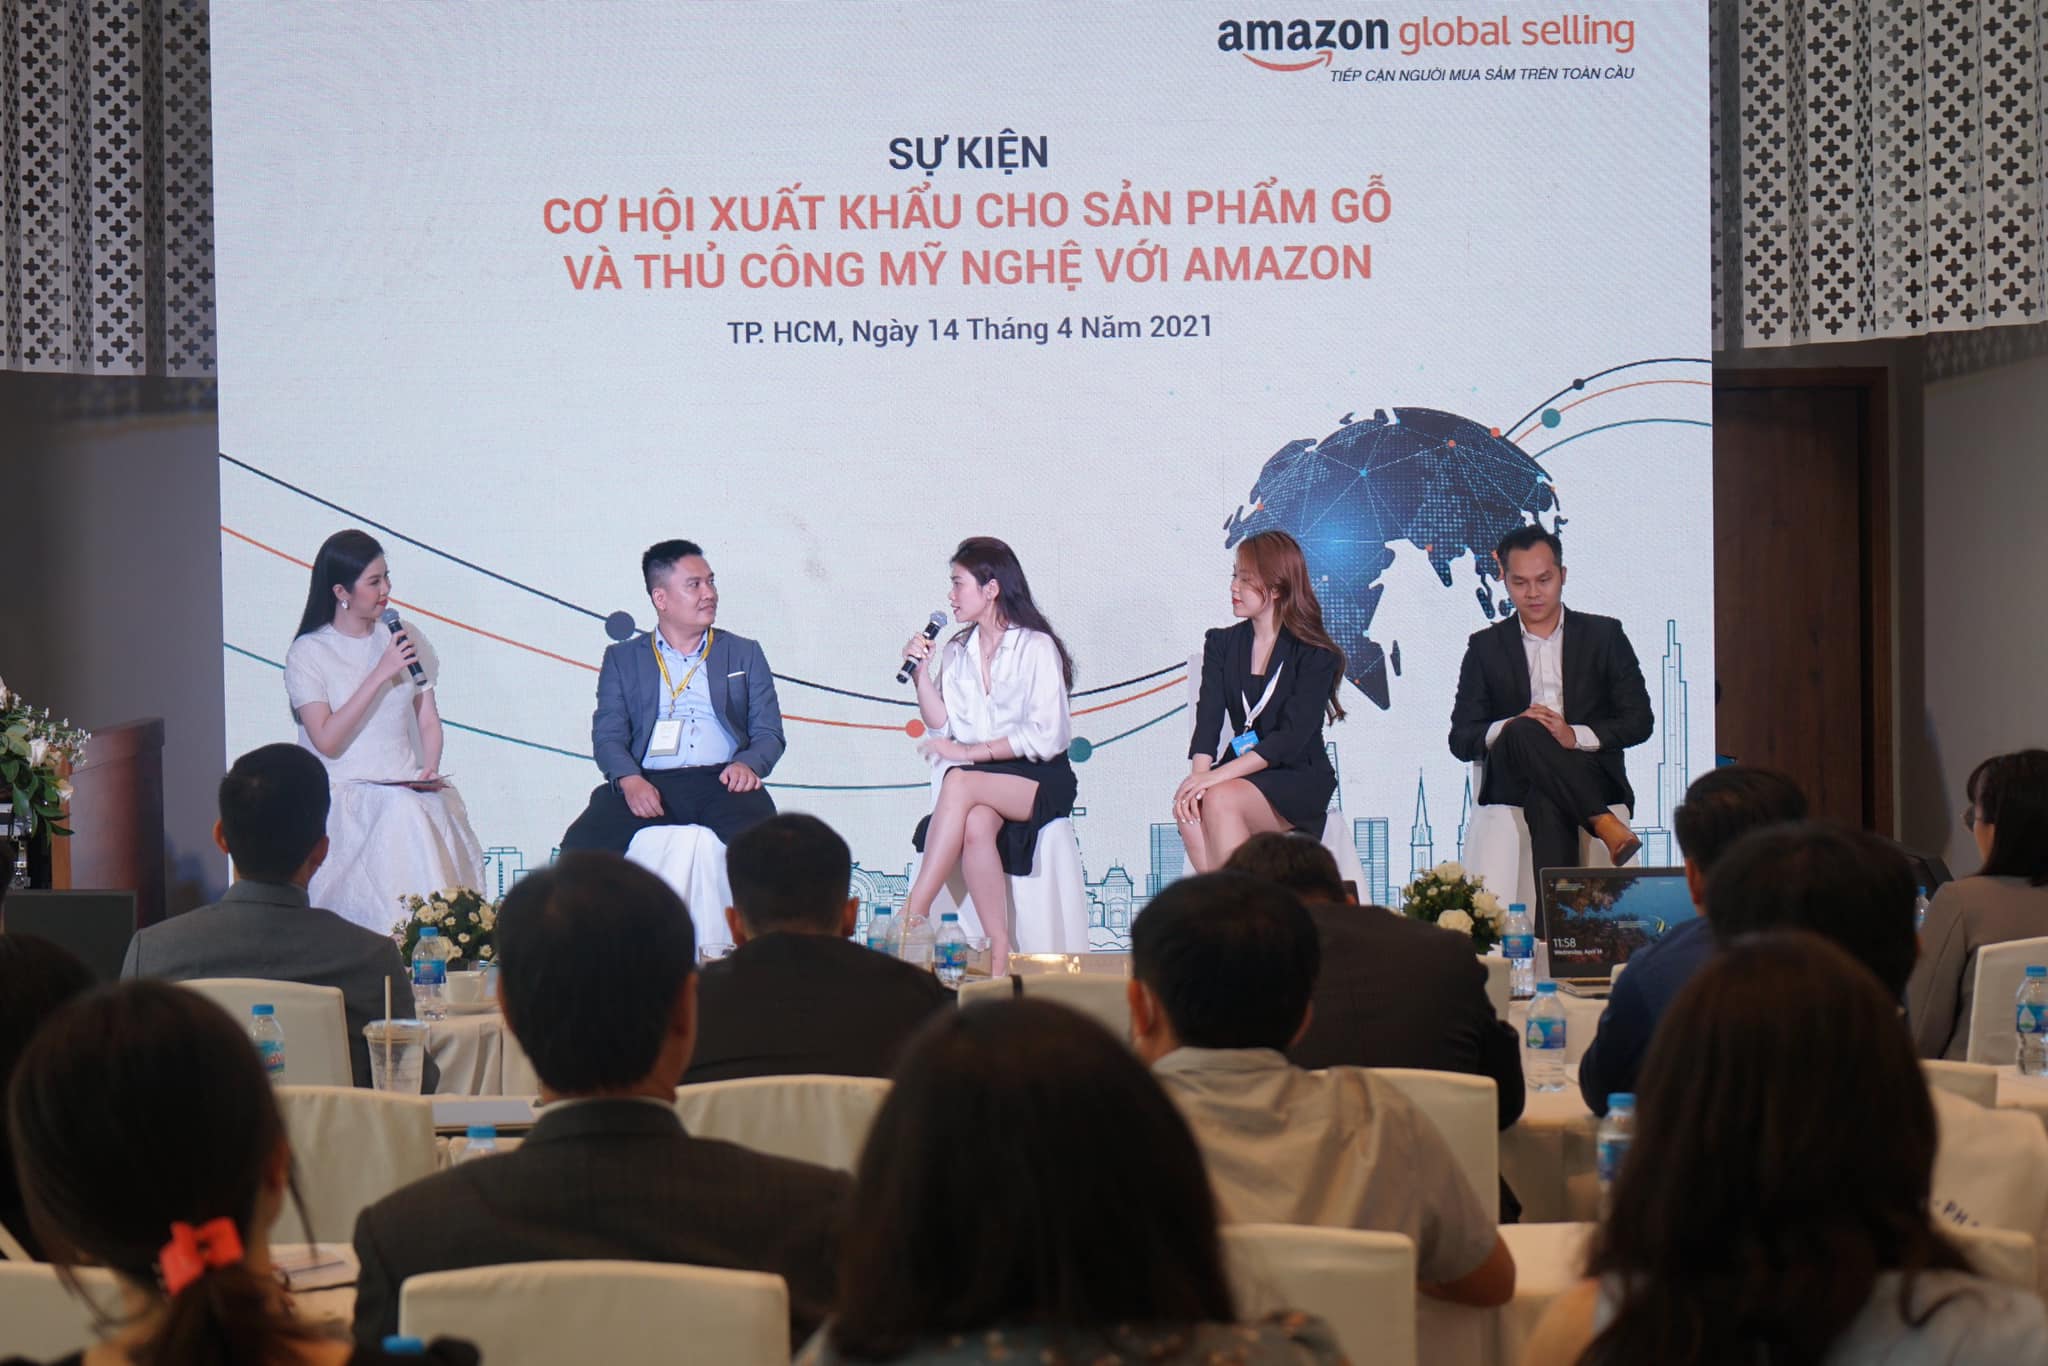 The export opportunities for wooden products and handicrafts with Amazon